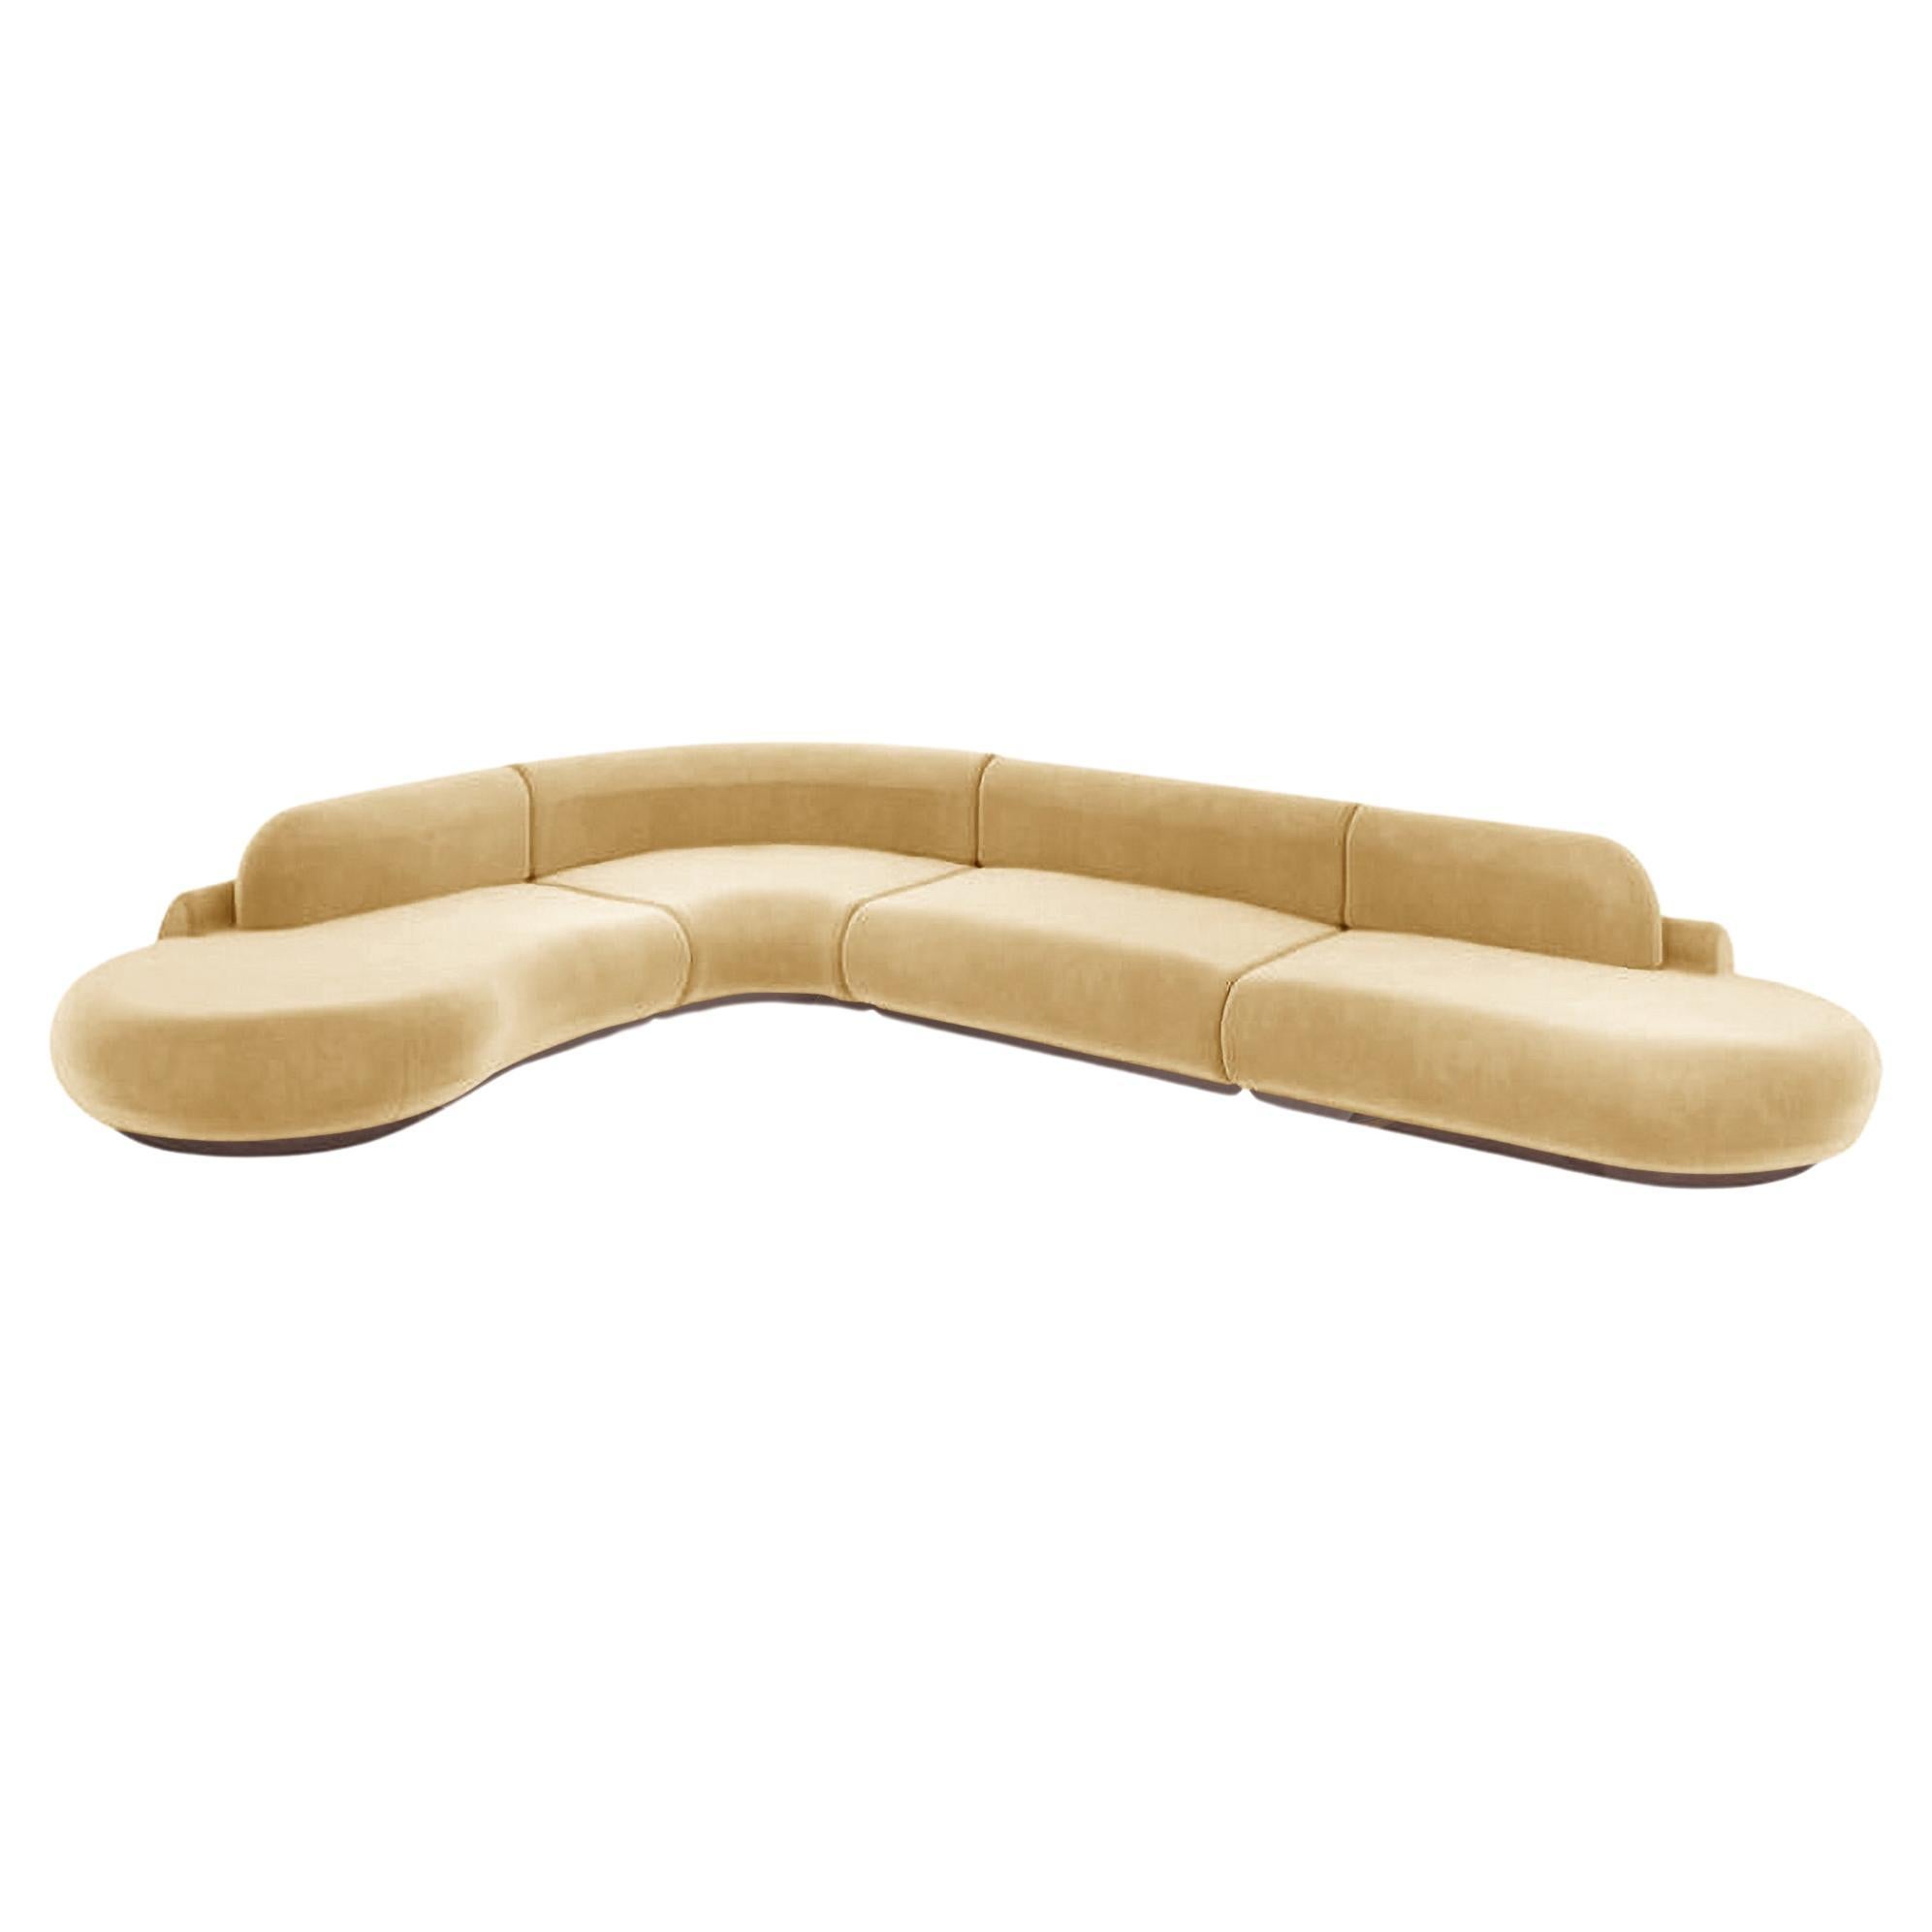 Naked Curved Sectional Sofa, 4 Piece with Beech Ash-056-1 and Vigo Plantain For Sale